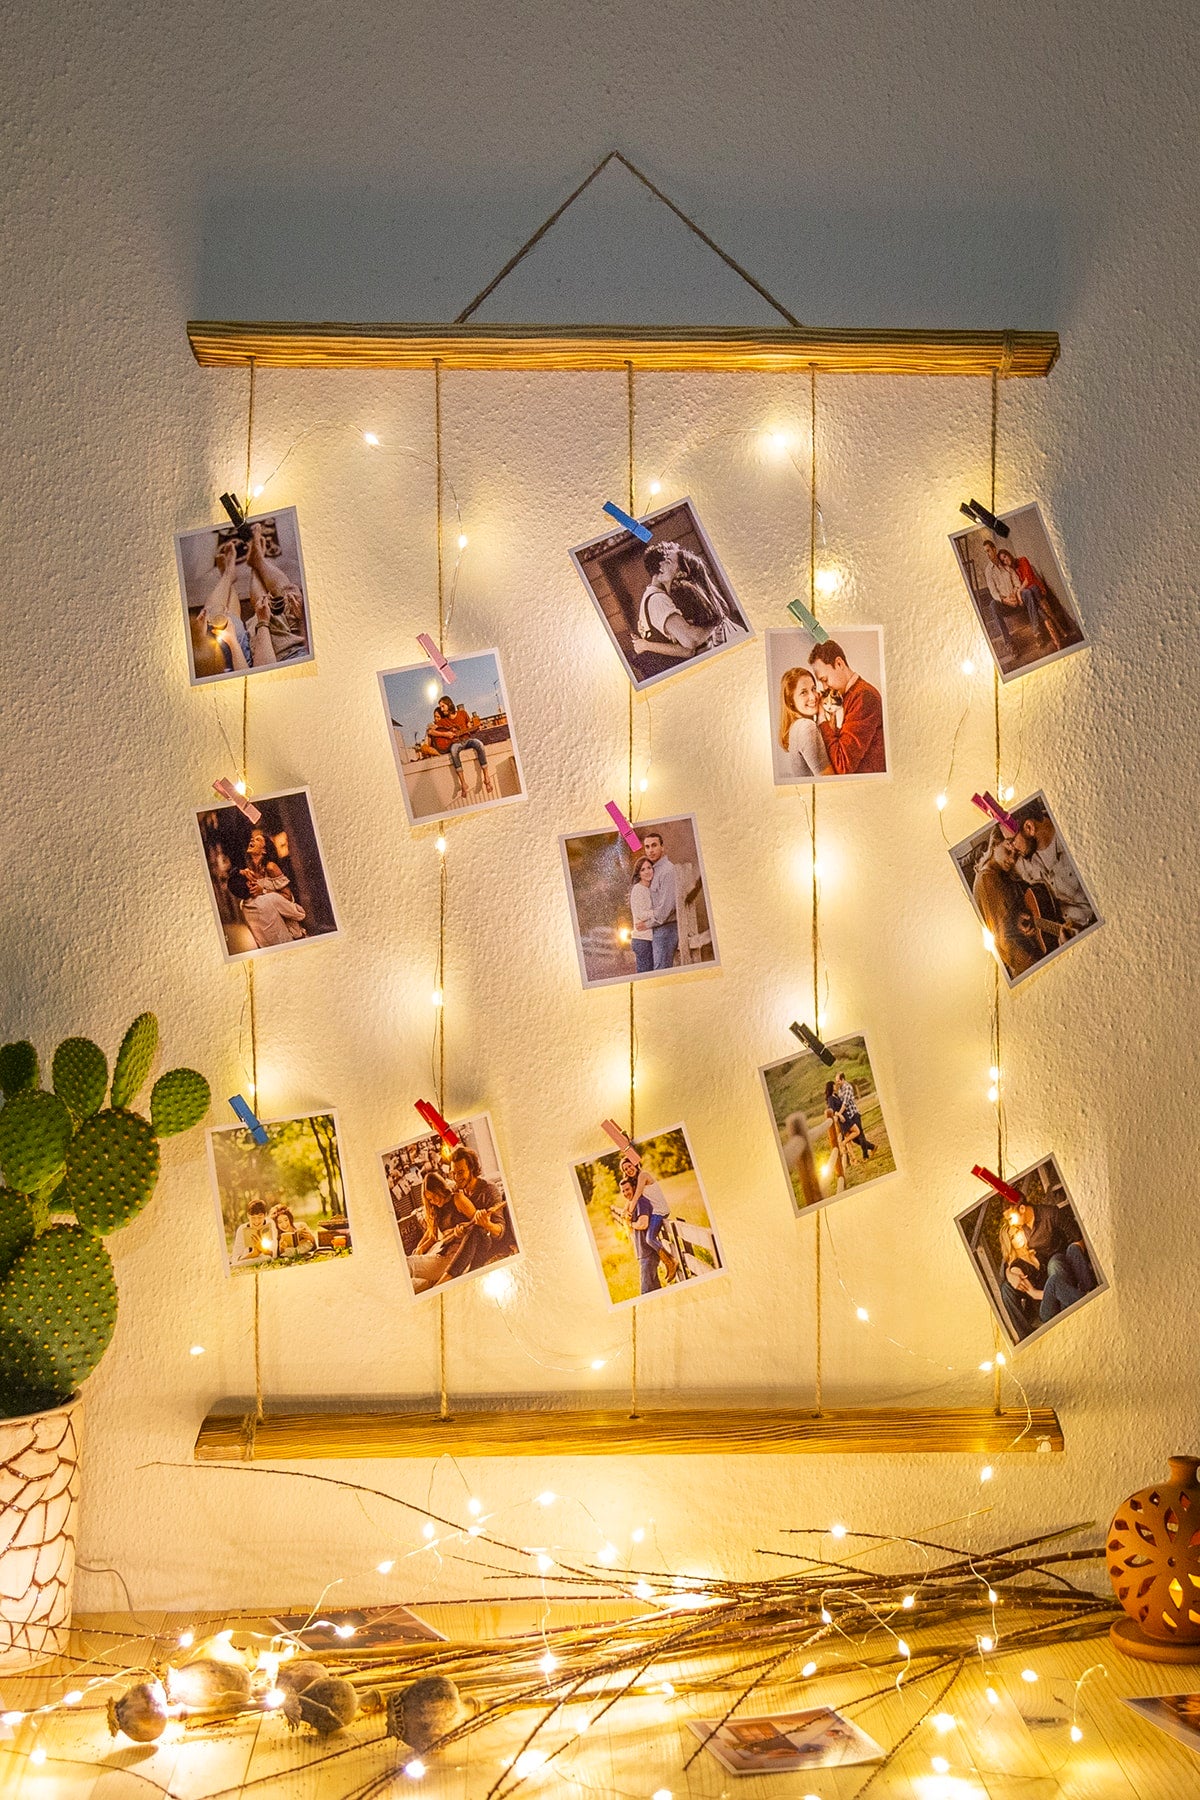 Large Wooden with Light Stick Hanging DIY Photo Display Macrame Wall Hanging Pictures Organizer With Clips Photo Background Decor new year gift ship from Turkey. Quality free shipping world. Russia Israil USA